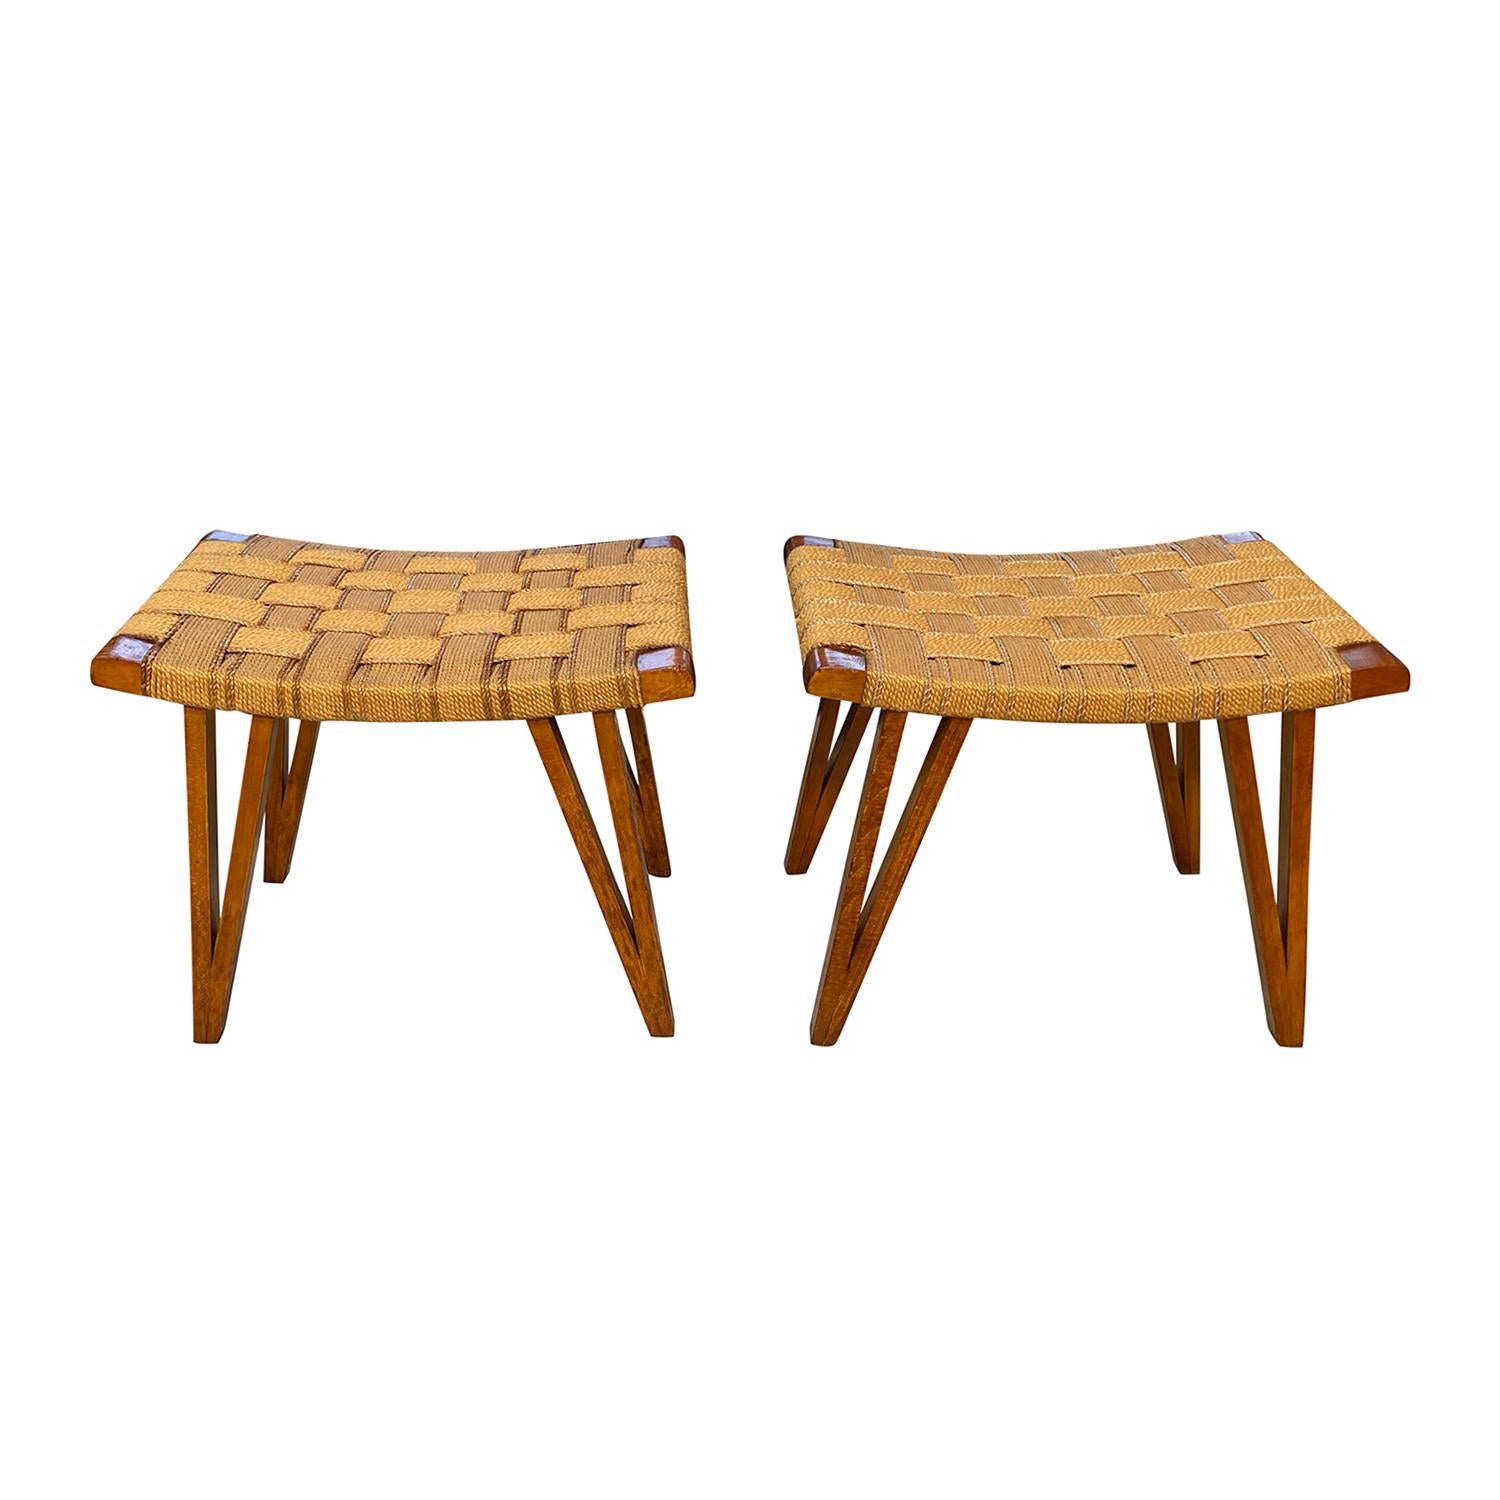 A vintage Mid-Century modern Italian pair of stools made of hand crafted waxed Oakwood designed by Augusto Romano, in good condition. The similar seat covers of the ottomans are made of woven hemp, standing on four arched wooden legs. Wear